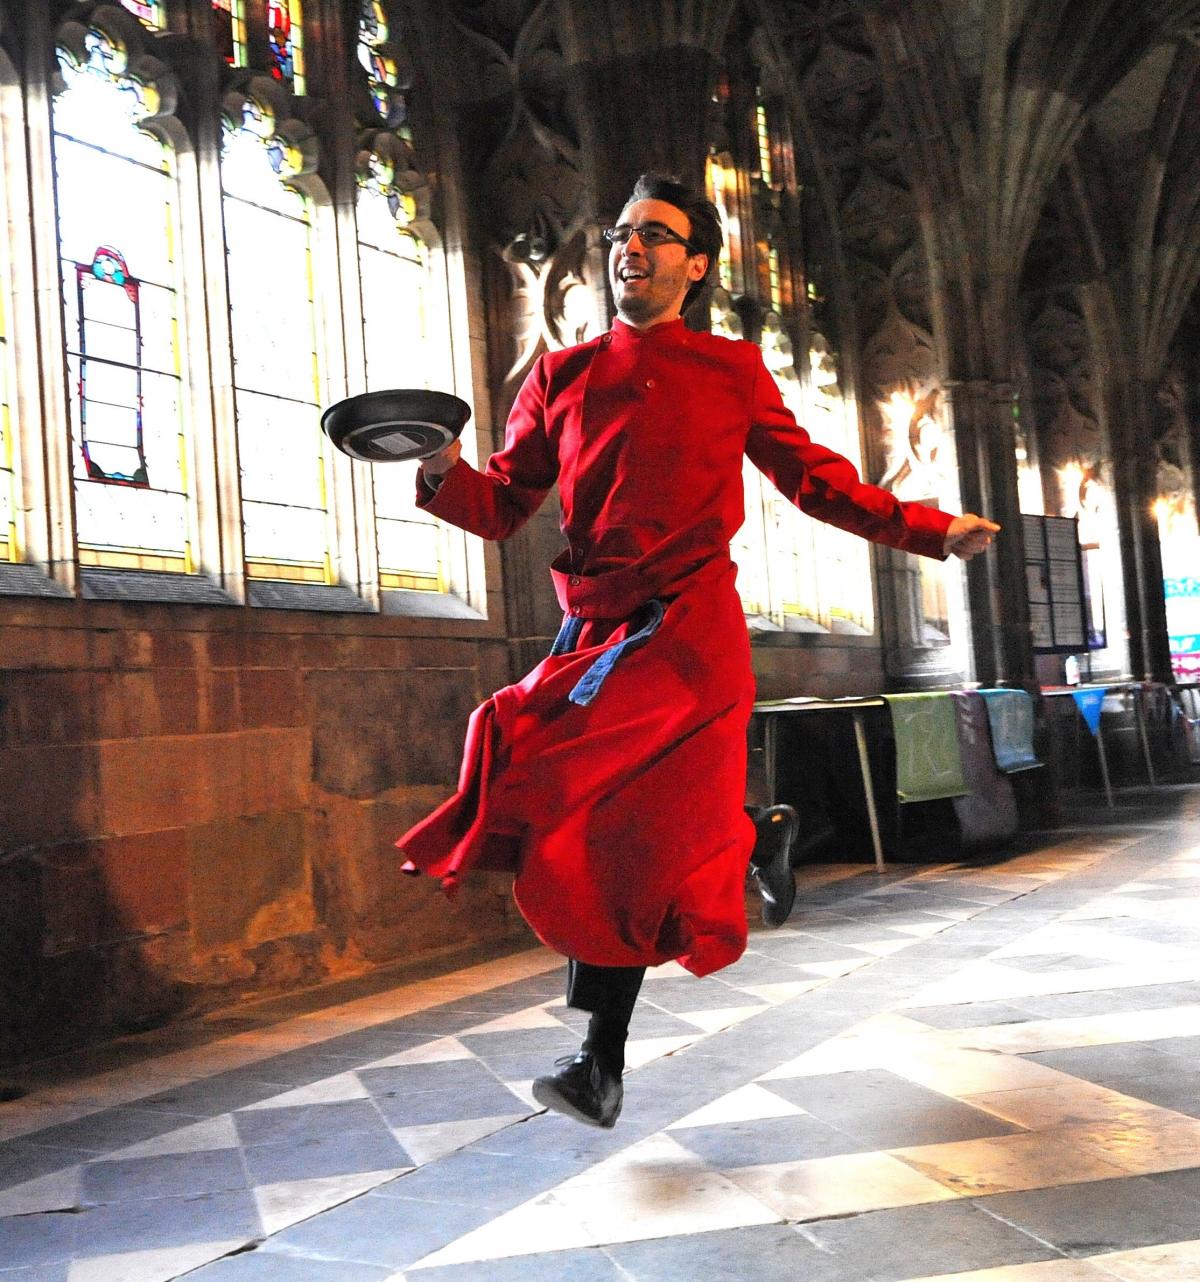 Worcester Cathedral Choir Annual Pancake Races around the Cathedral Cloisters on Tuesday